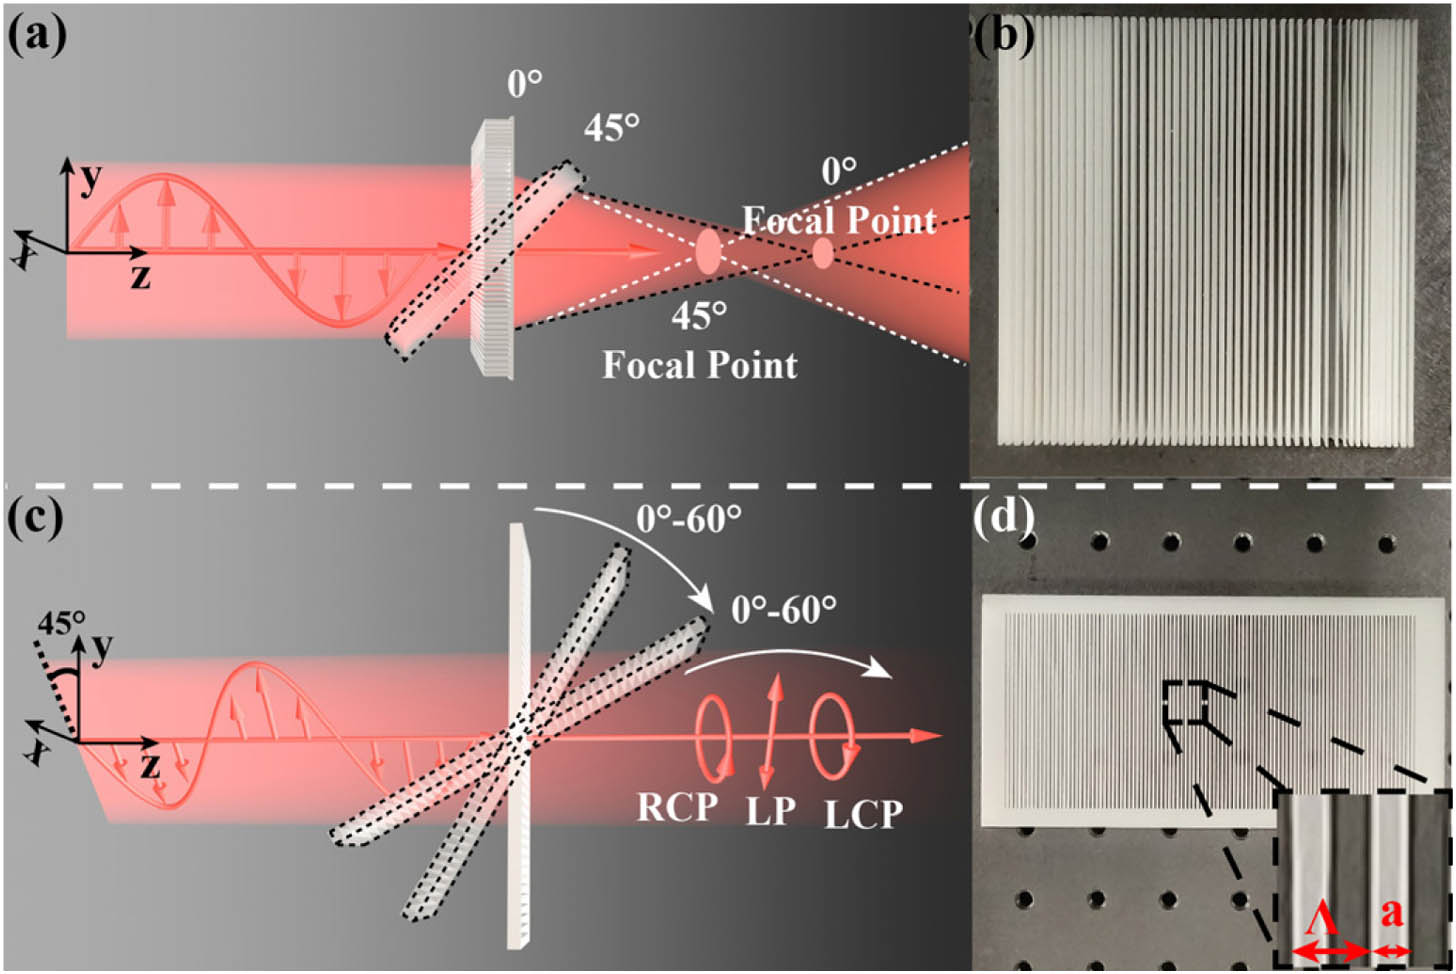 (a) Schematic of multifunctional wavefront shaping via the rotation of the cylindrical metalens composed of nonuniform gratings. The focal length shifts with the incident angle. (b) Photograph of the metalens. (c) Schematic of multifunctional polarization control via the rotation of the uniform grating around the x axis. The incident beam is polarized along 45° relative to the grating ridges. By changing the incident angle from 0° to 60°, the output polarization state can be switched among RCP, cross-LP, and LCP. (d) Photograph of the uniform grating for polarization control. The inset defines the period and the ridge width.